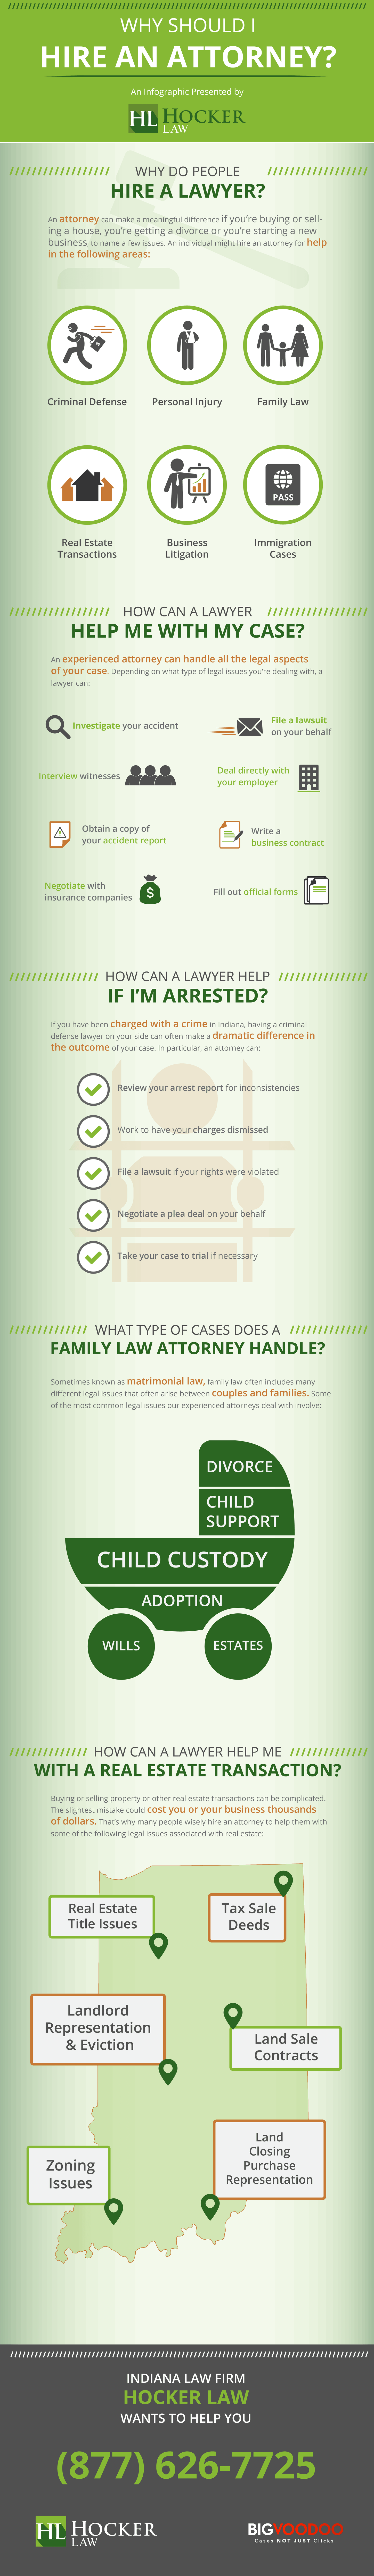 Why Hire An Attorney infographic